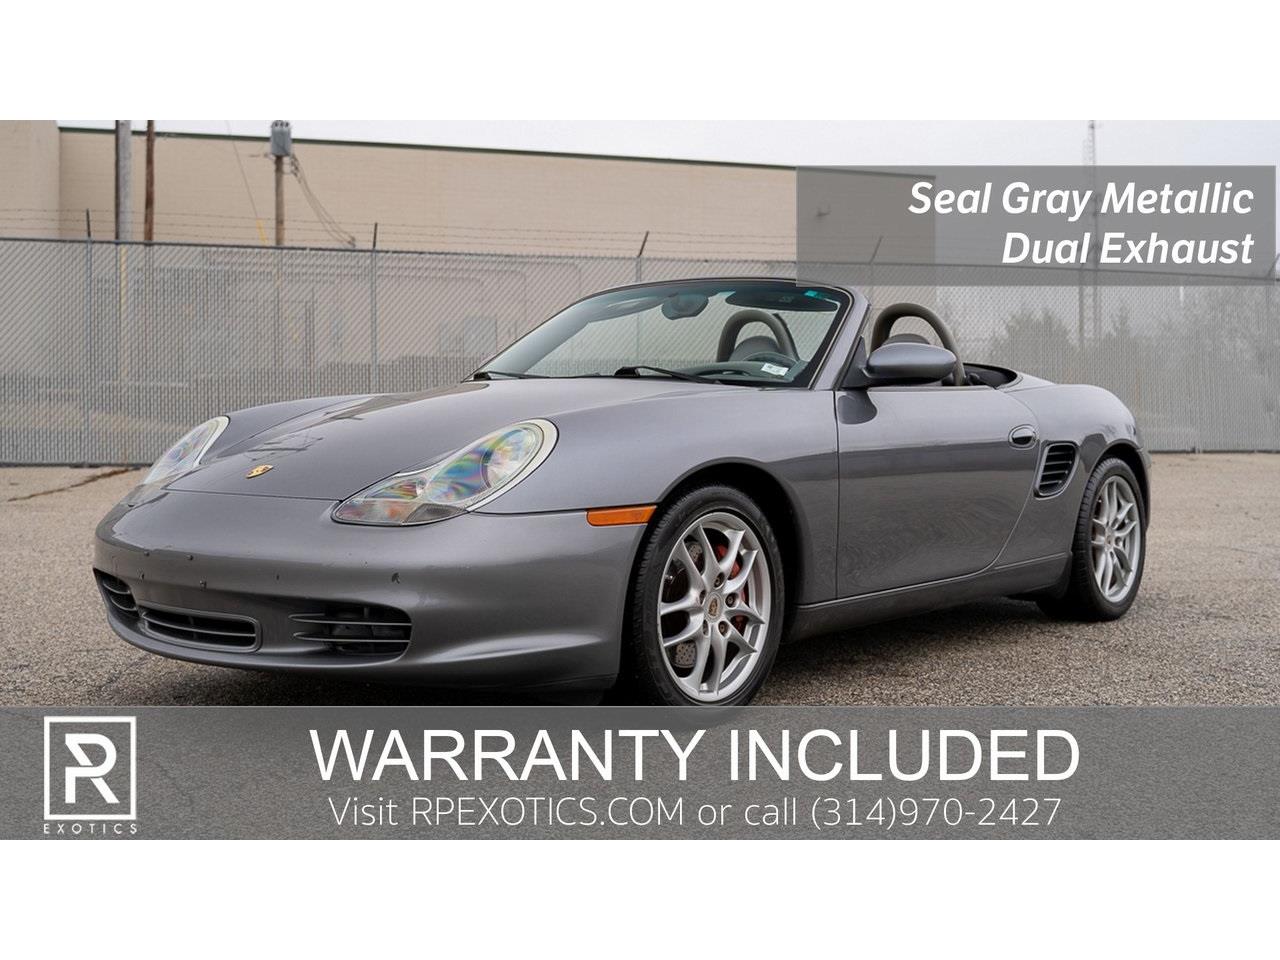 For Sale: 2003 Porsche Boxster in Jackson, Mississippi for sale in Jackson, MS